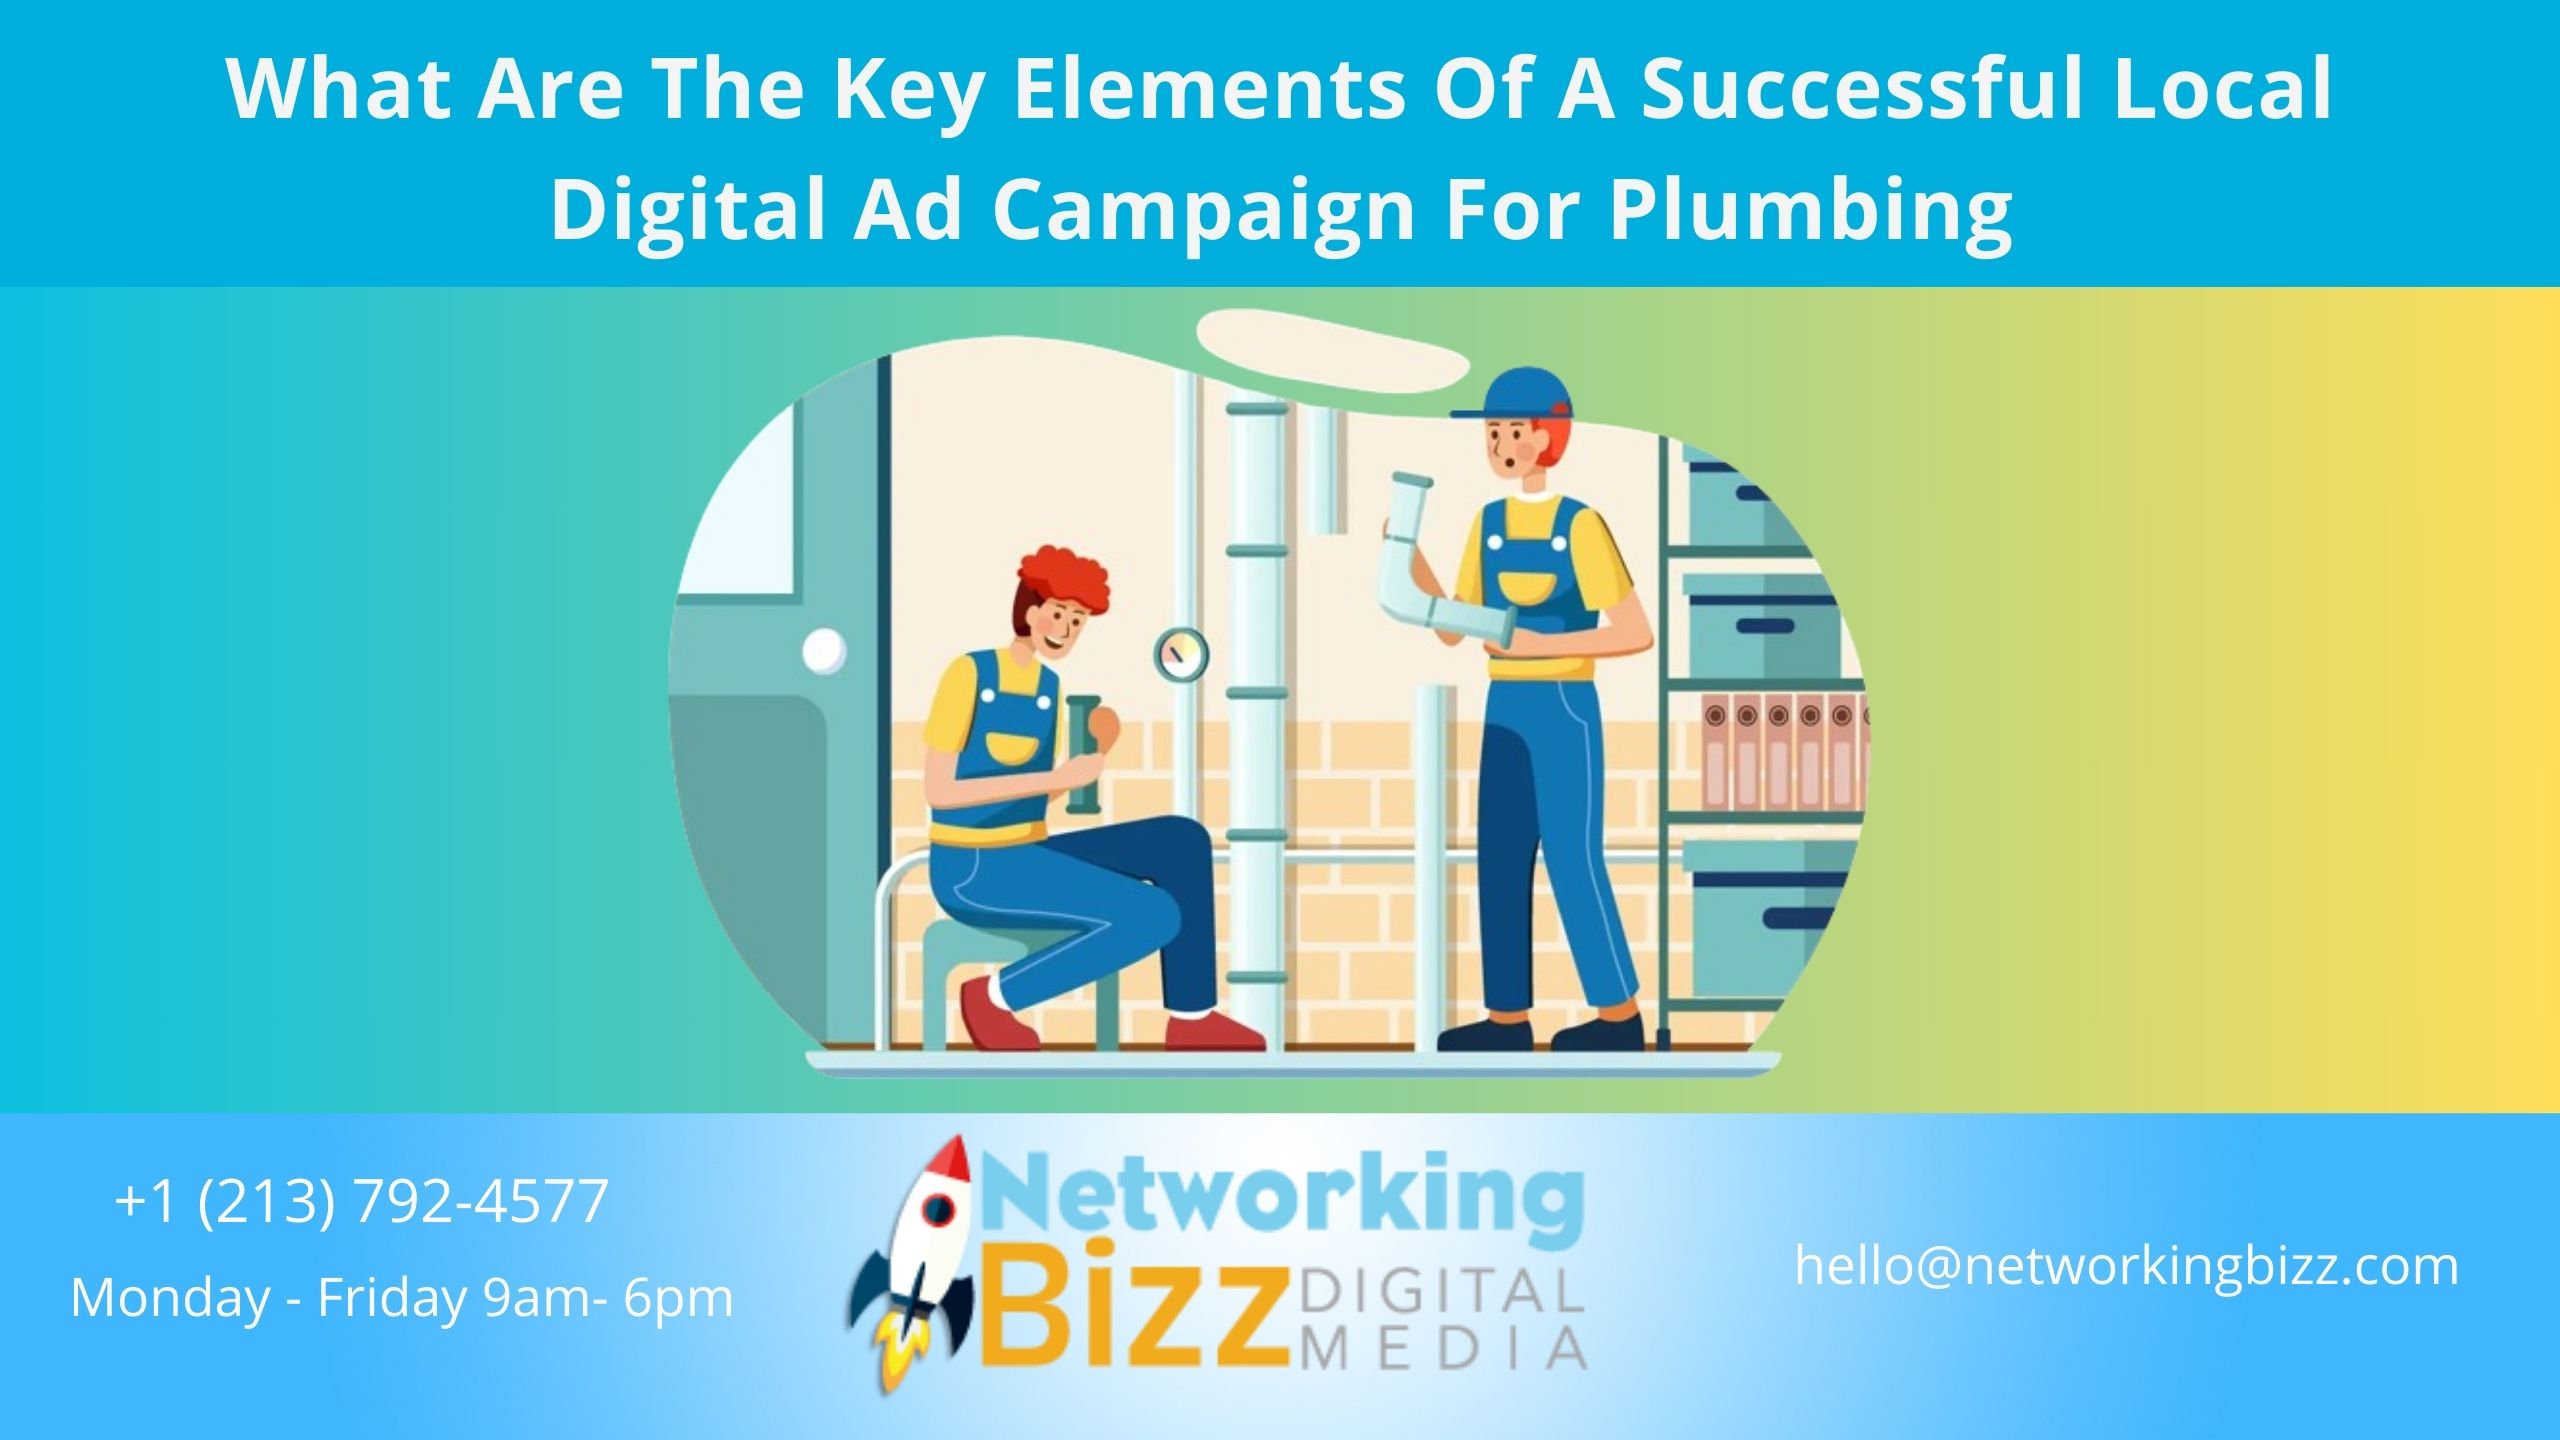 What Are The Key Elements Of A Successful Local Digital Ad Campaign For Plumbing